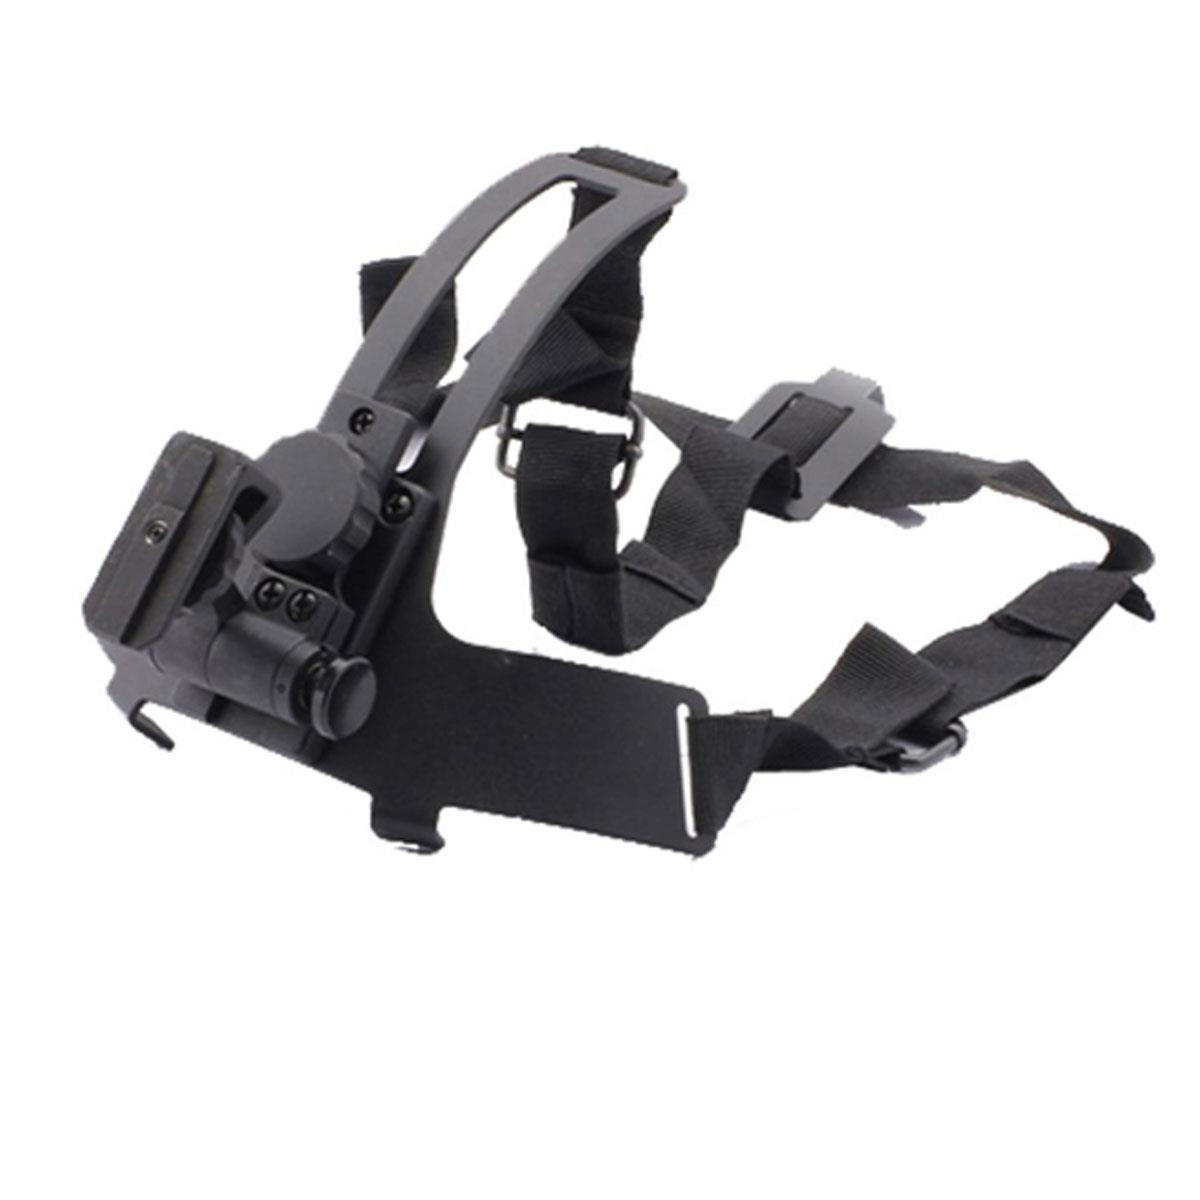 Image of Newcon Optik Night Vision Helmet Mount for NVS-14 or NVS-7 Night Vision Goggles